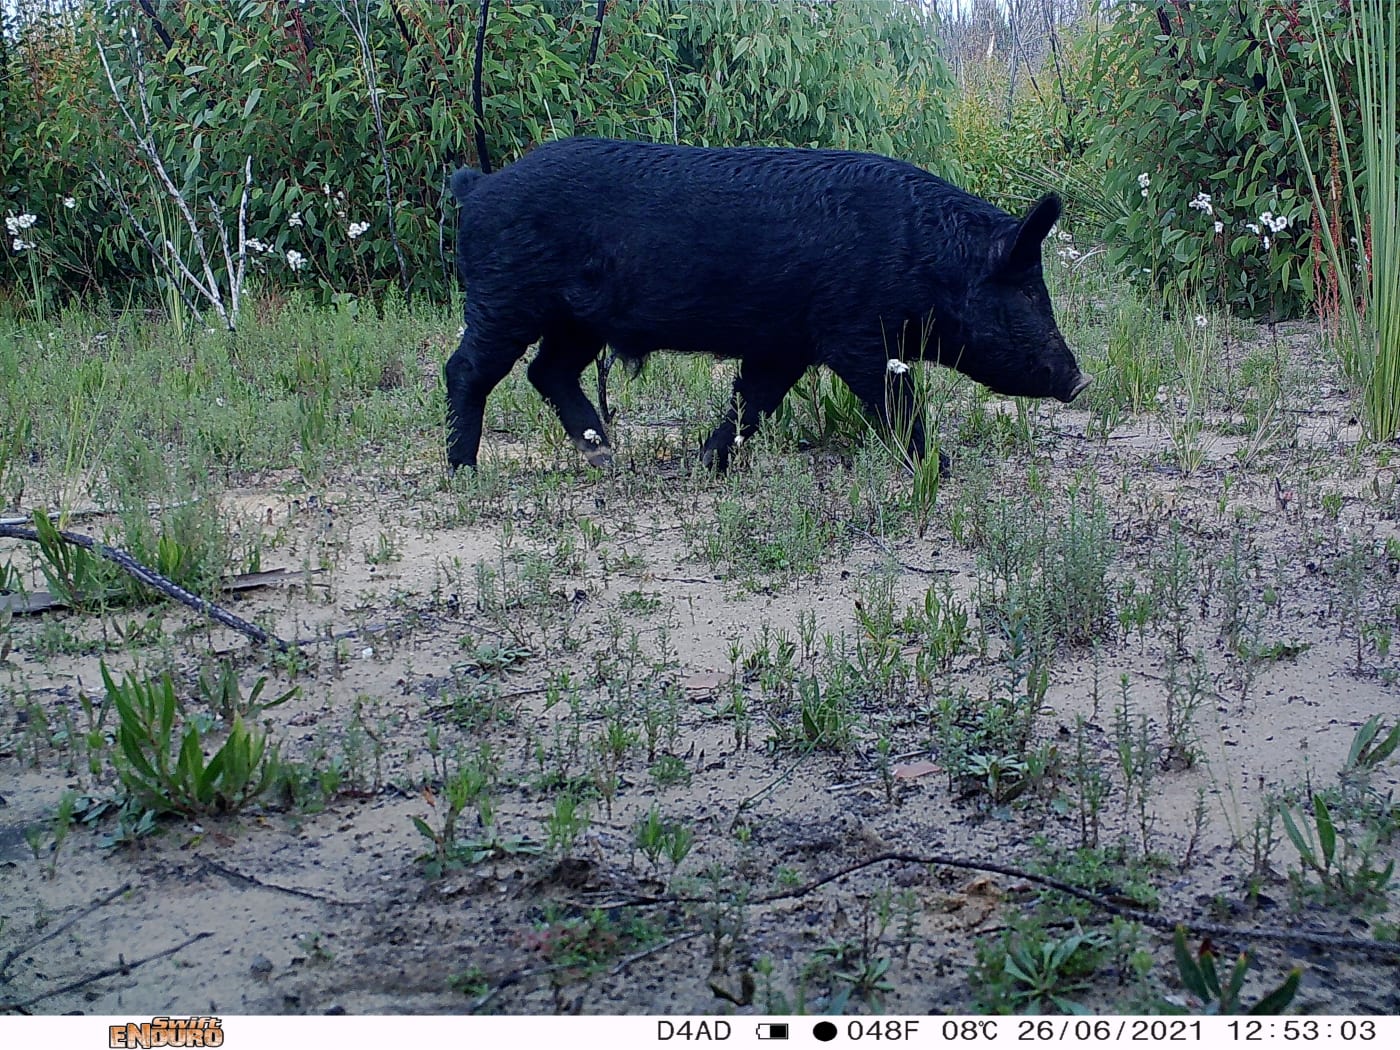 A feral pig captured on camera at a Kangaroo Island monitoring site.
Eyes on Recovery is a large-scale sensor camera project. and a collaboration between WWF, Conservation International, and local land managers and research organisations. Google-powered AI technology has been trained to identify Australian animals in photos to track the recovery of threatened species following the 2019-20 bushfires.